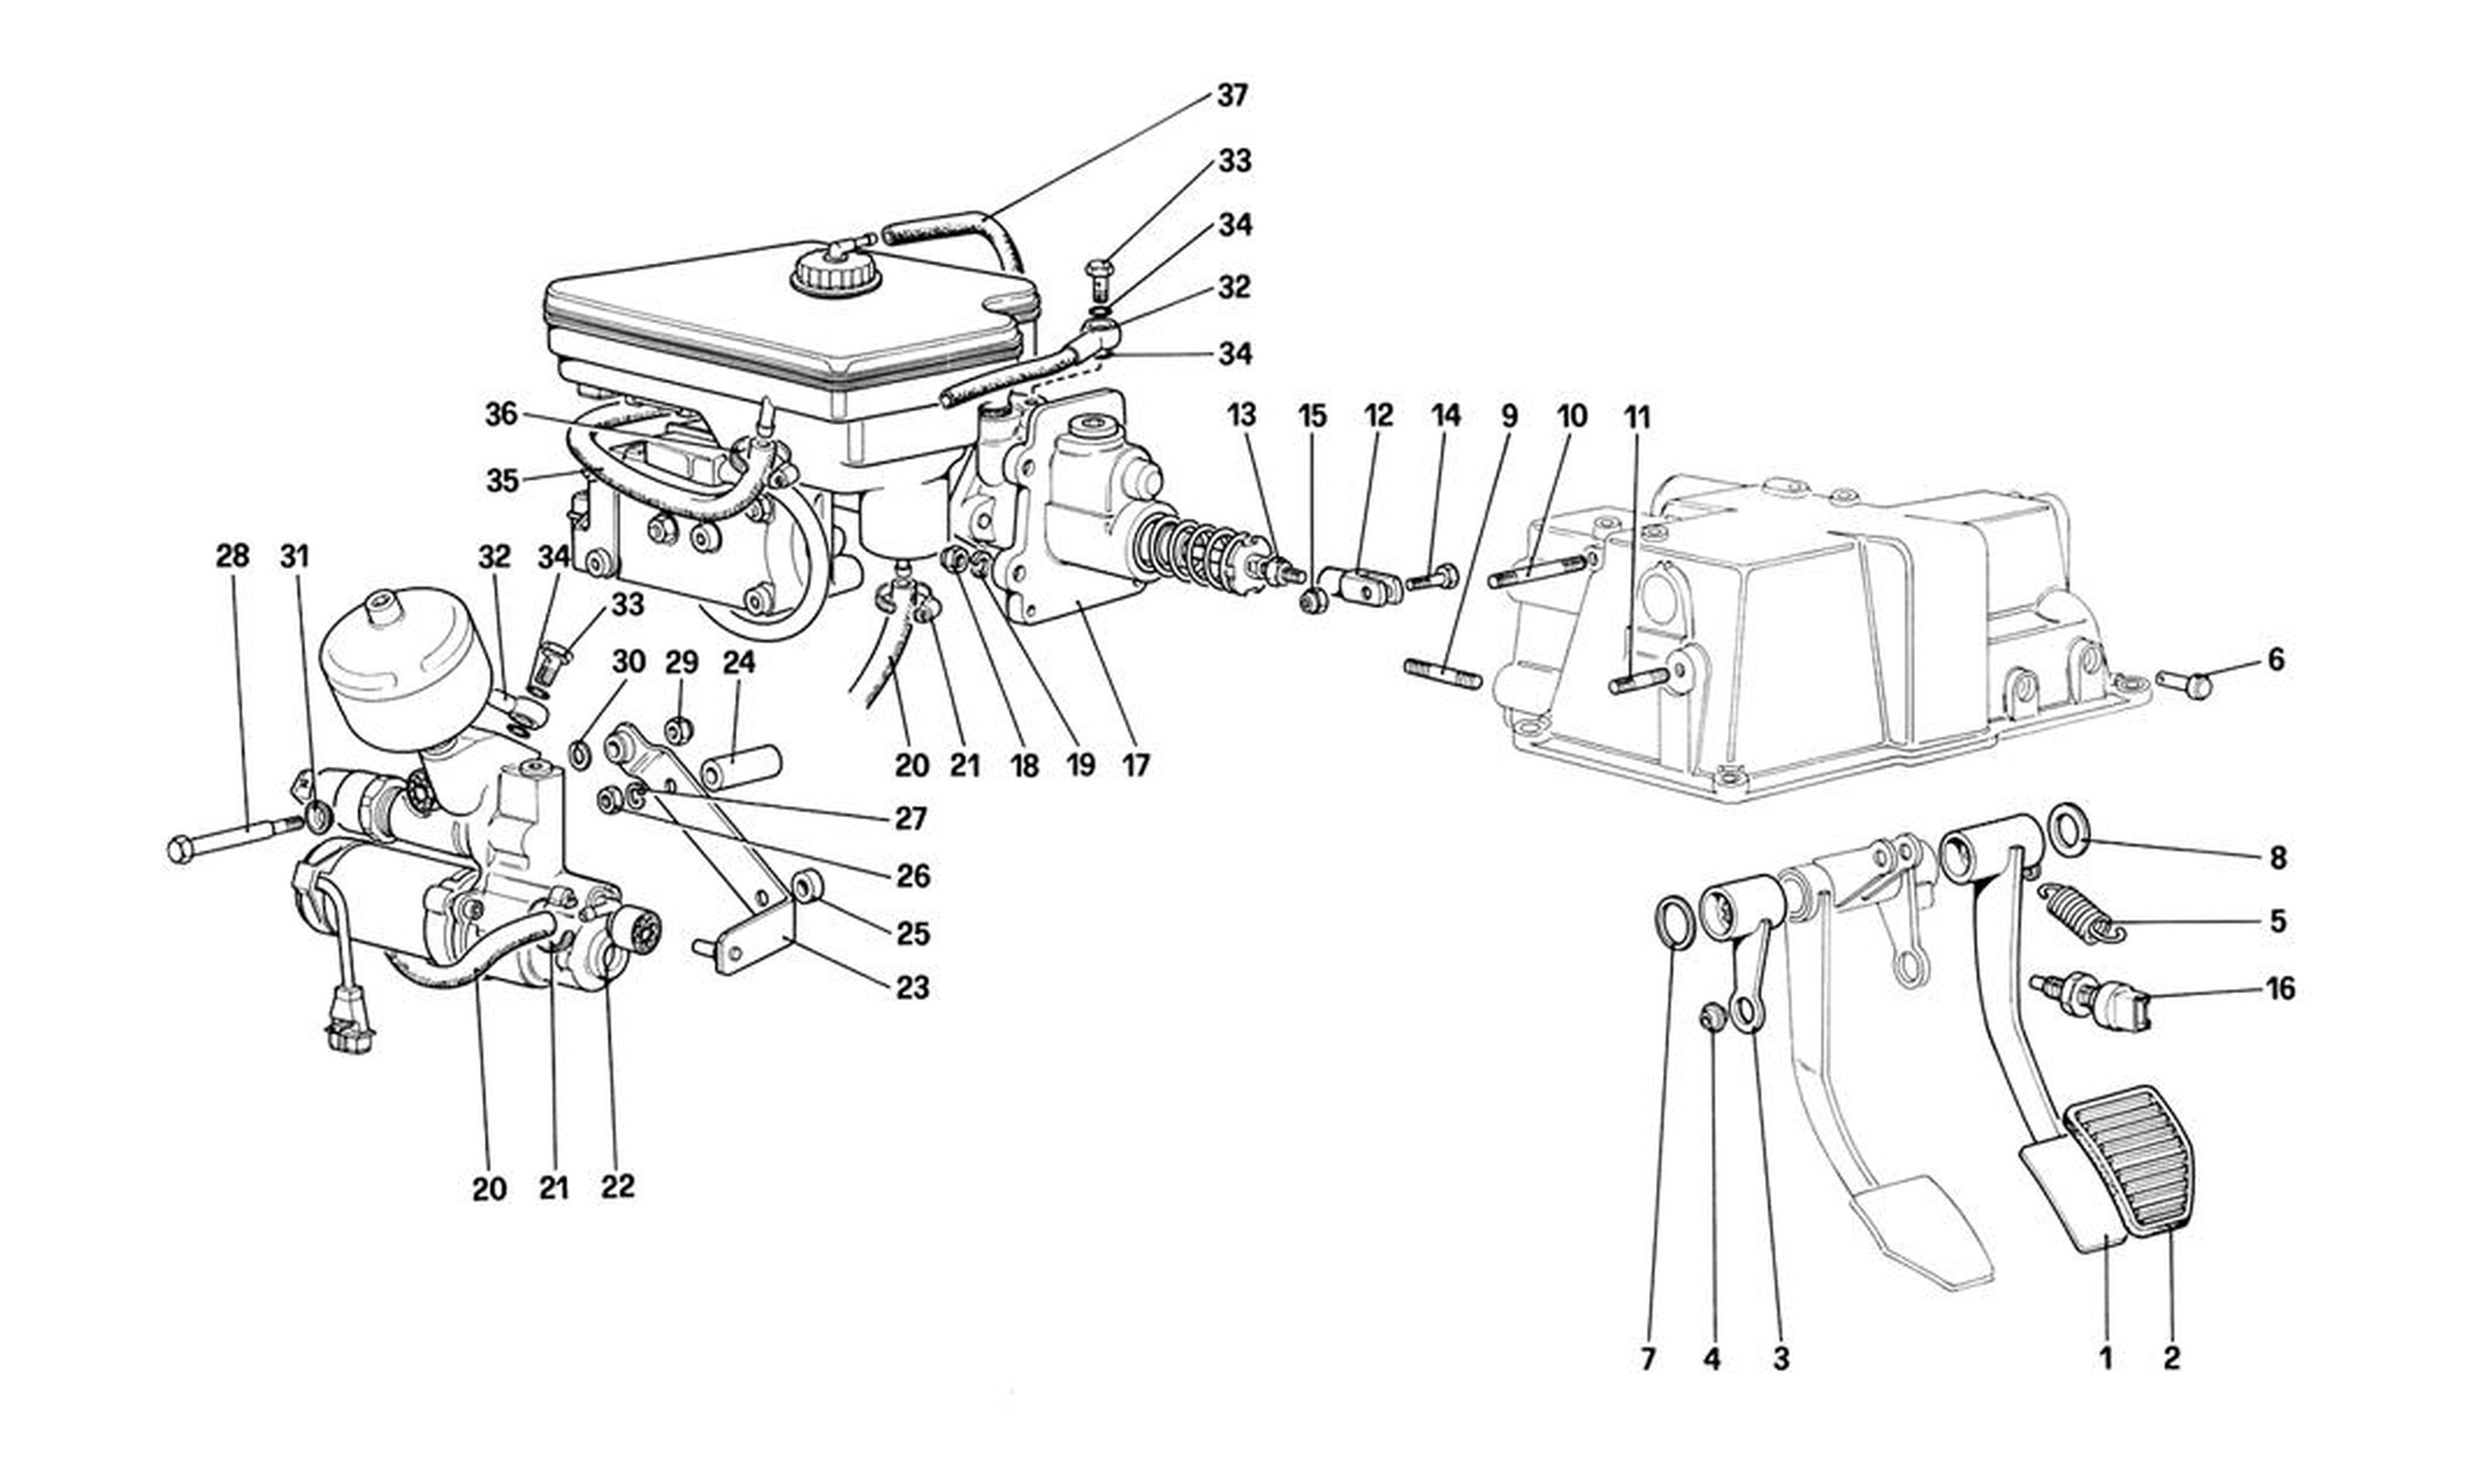 Schematic: Brake Hydraulic System (For Car With Antiskid System)